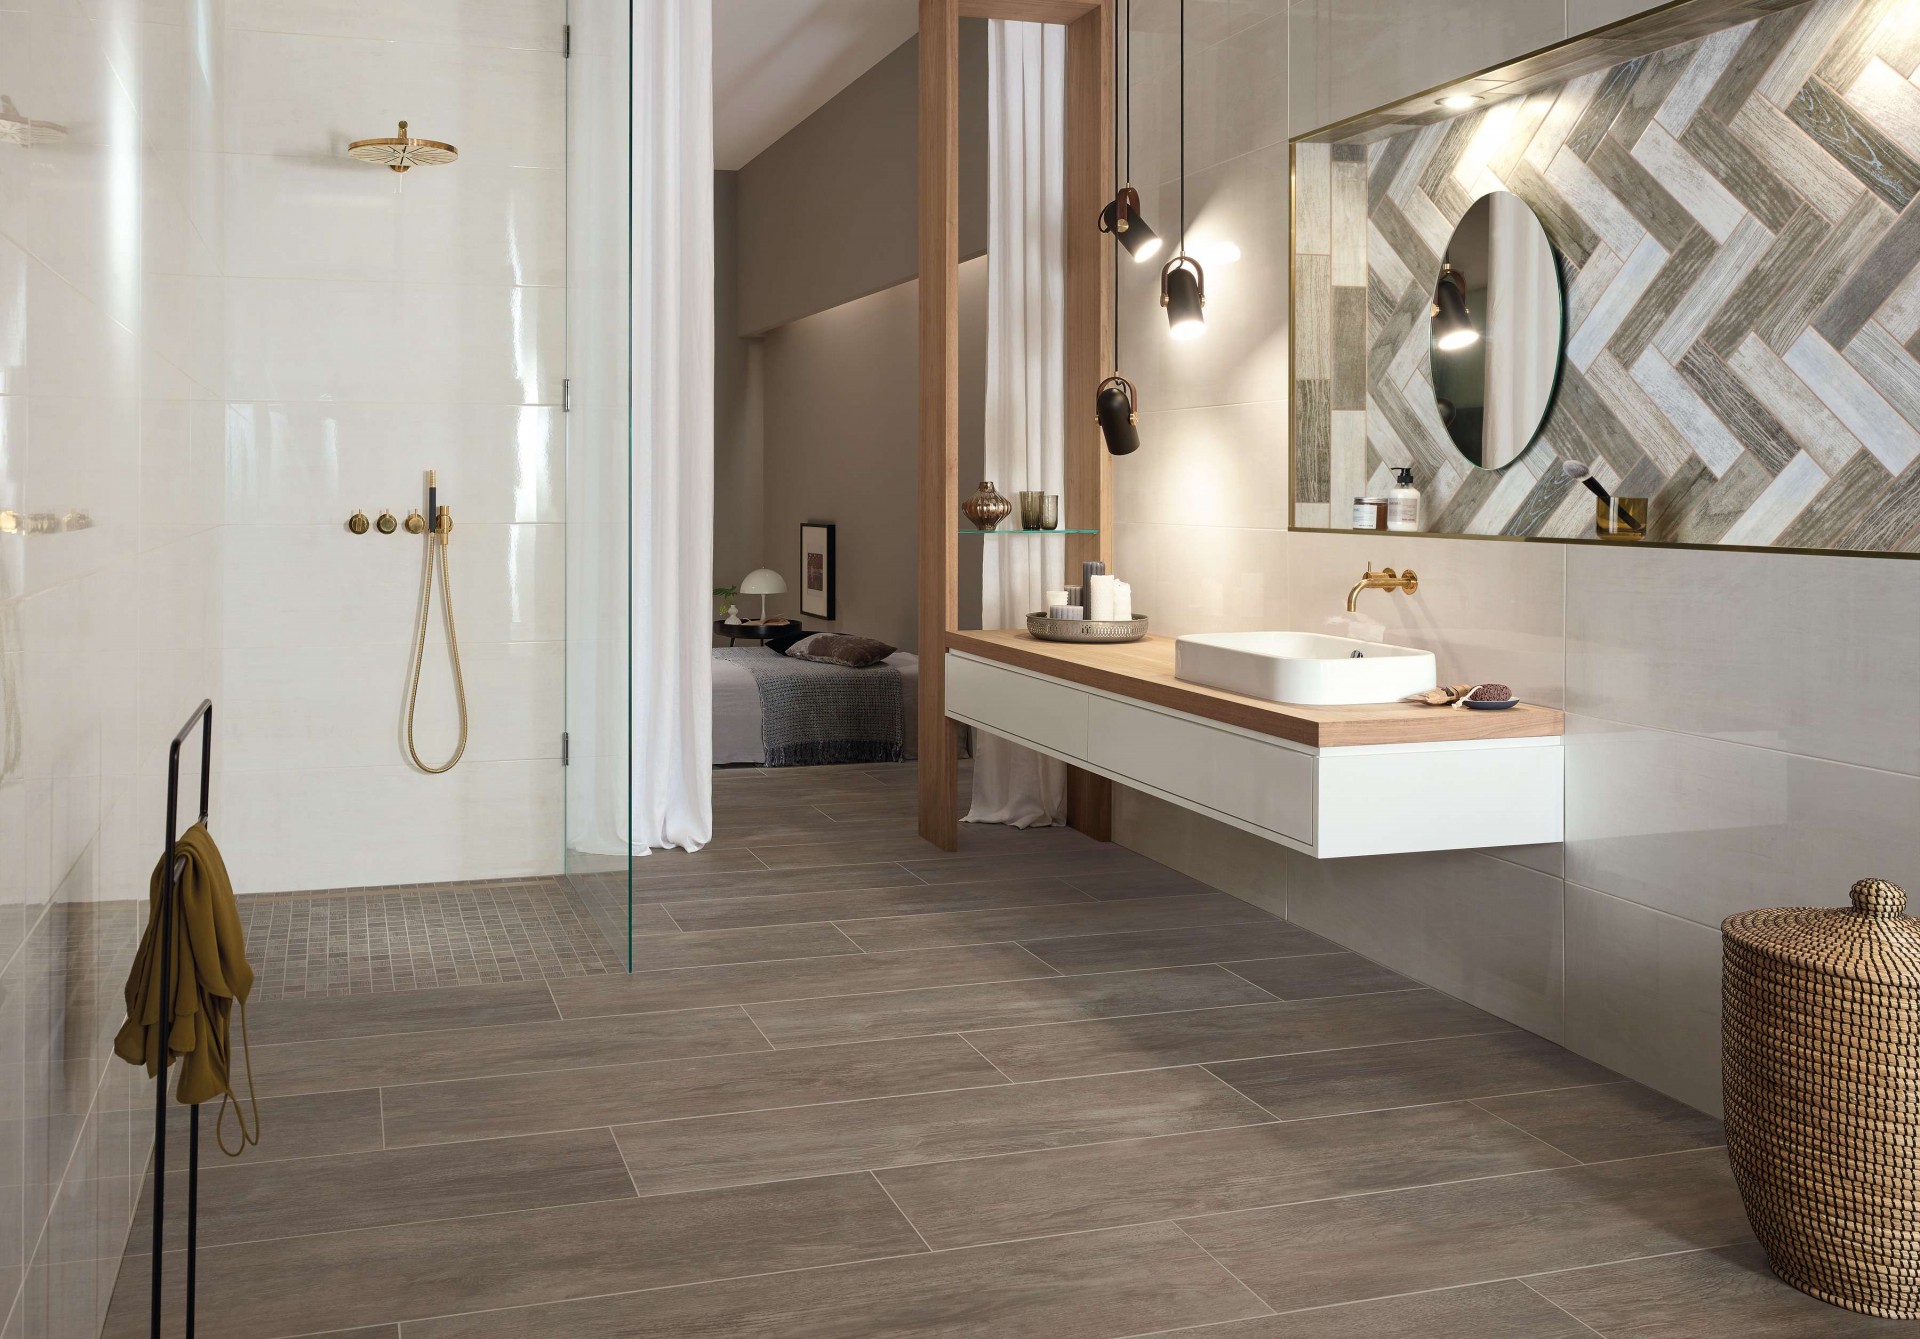 Hytect Tile in Mando Driftwood in this open style bathroom